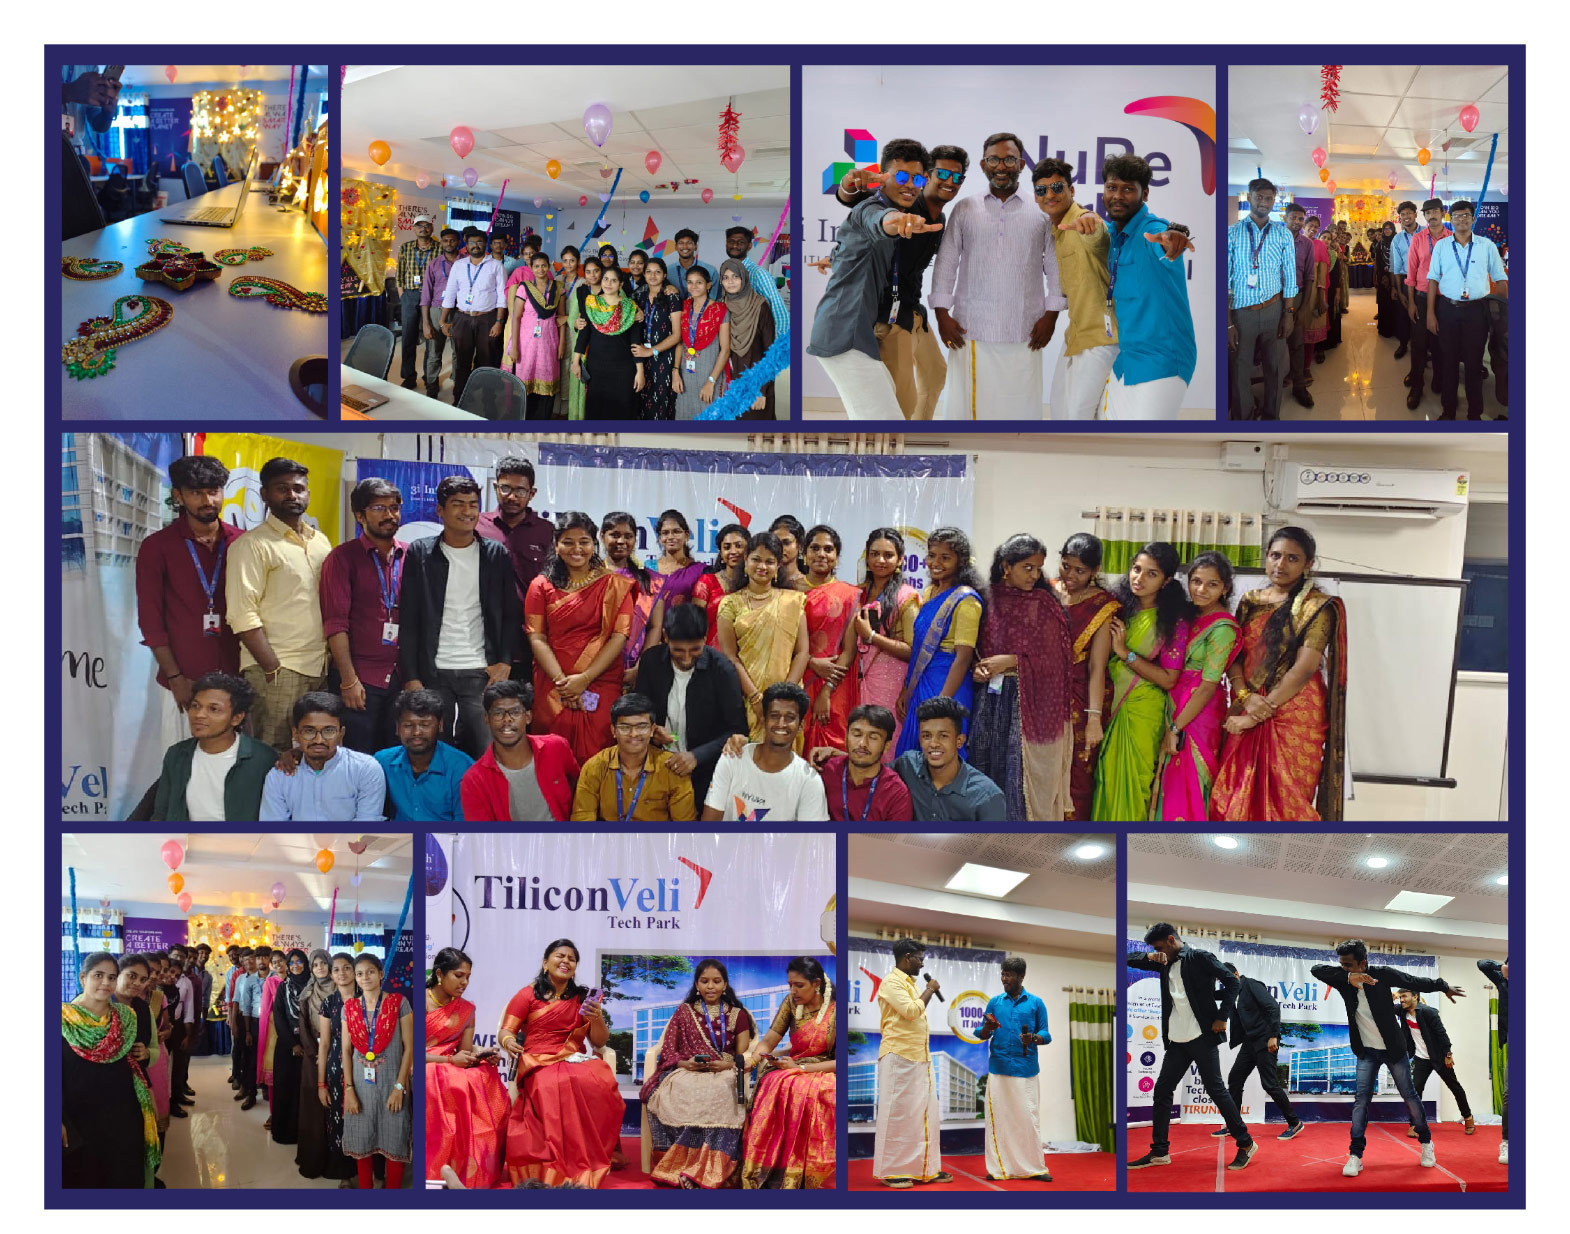 The Yuvas Celebrated the Festival of Diwali with Ethnic Wear,Music, Dance, Stand-Up Comedy etc.